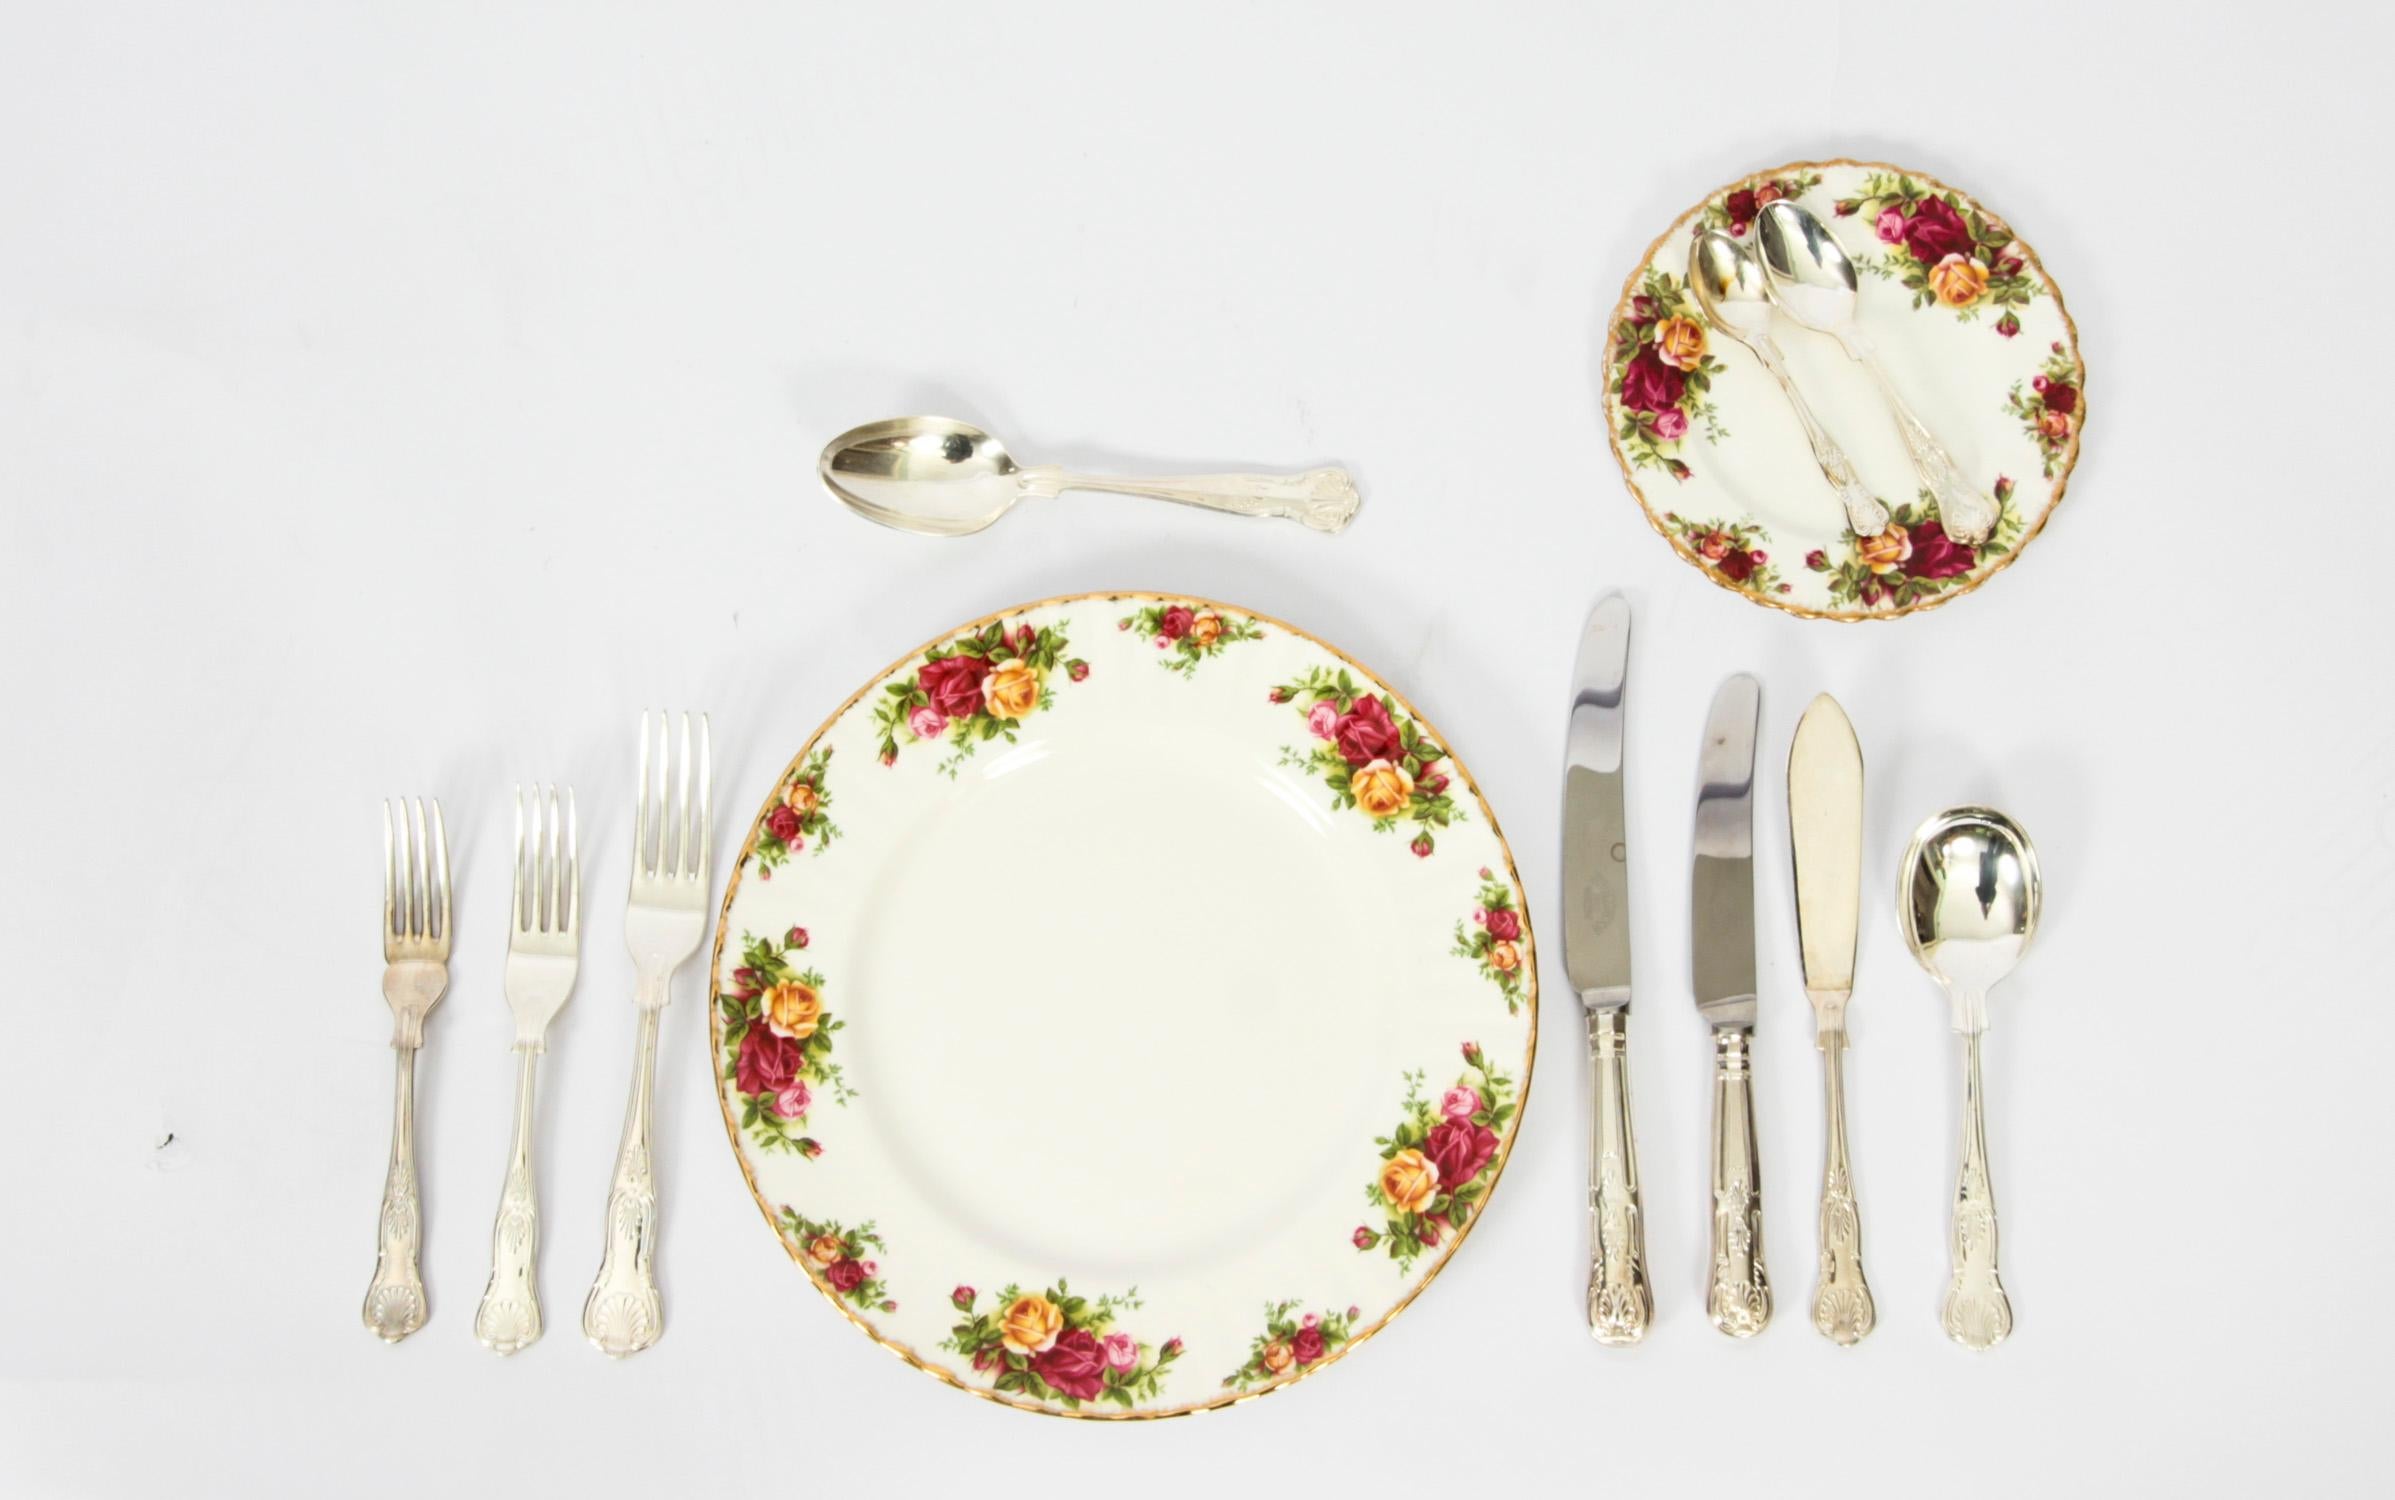 This is a stunning vintage 12 place setting silver plated cutlery set by the renowned silversmith John Turton mid 20th century in date.
 
The beautiful set consists of 126 pieces in the King's pattern.
 
It is beautifully housed in an English